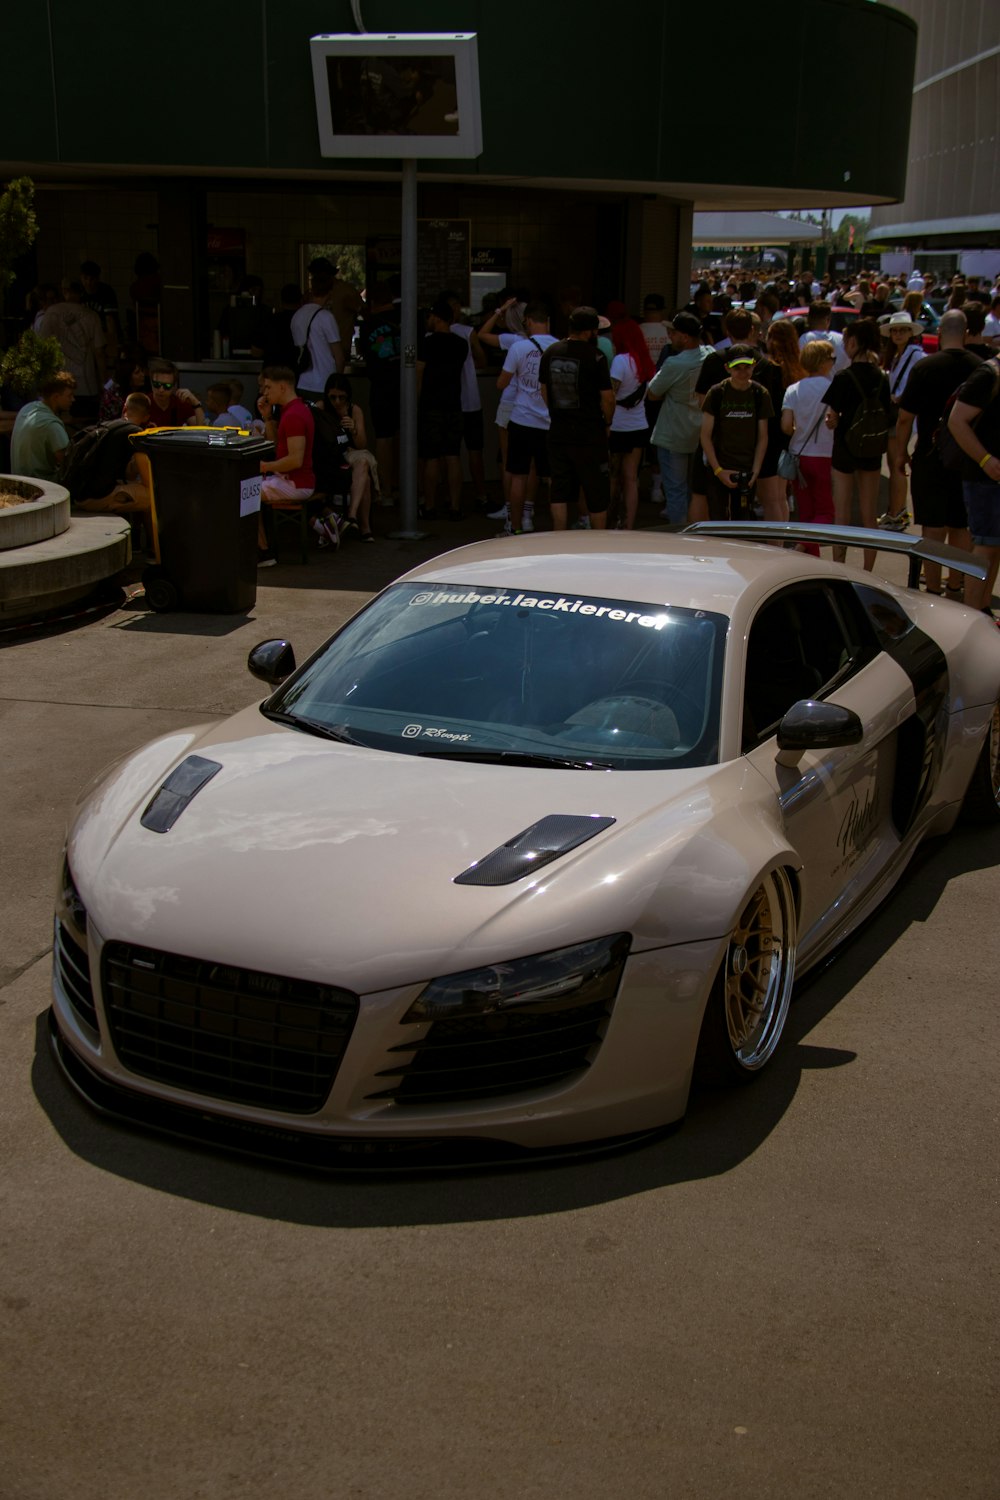 a white sports car parked in front of a crowd of people